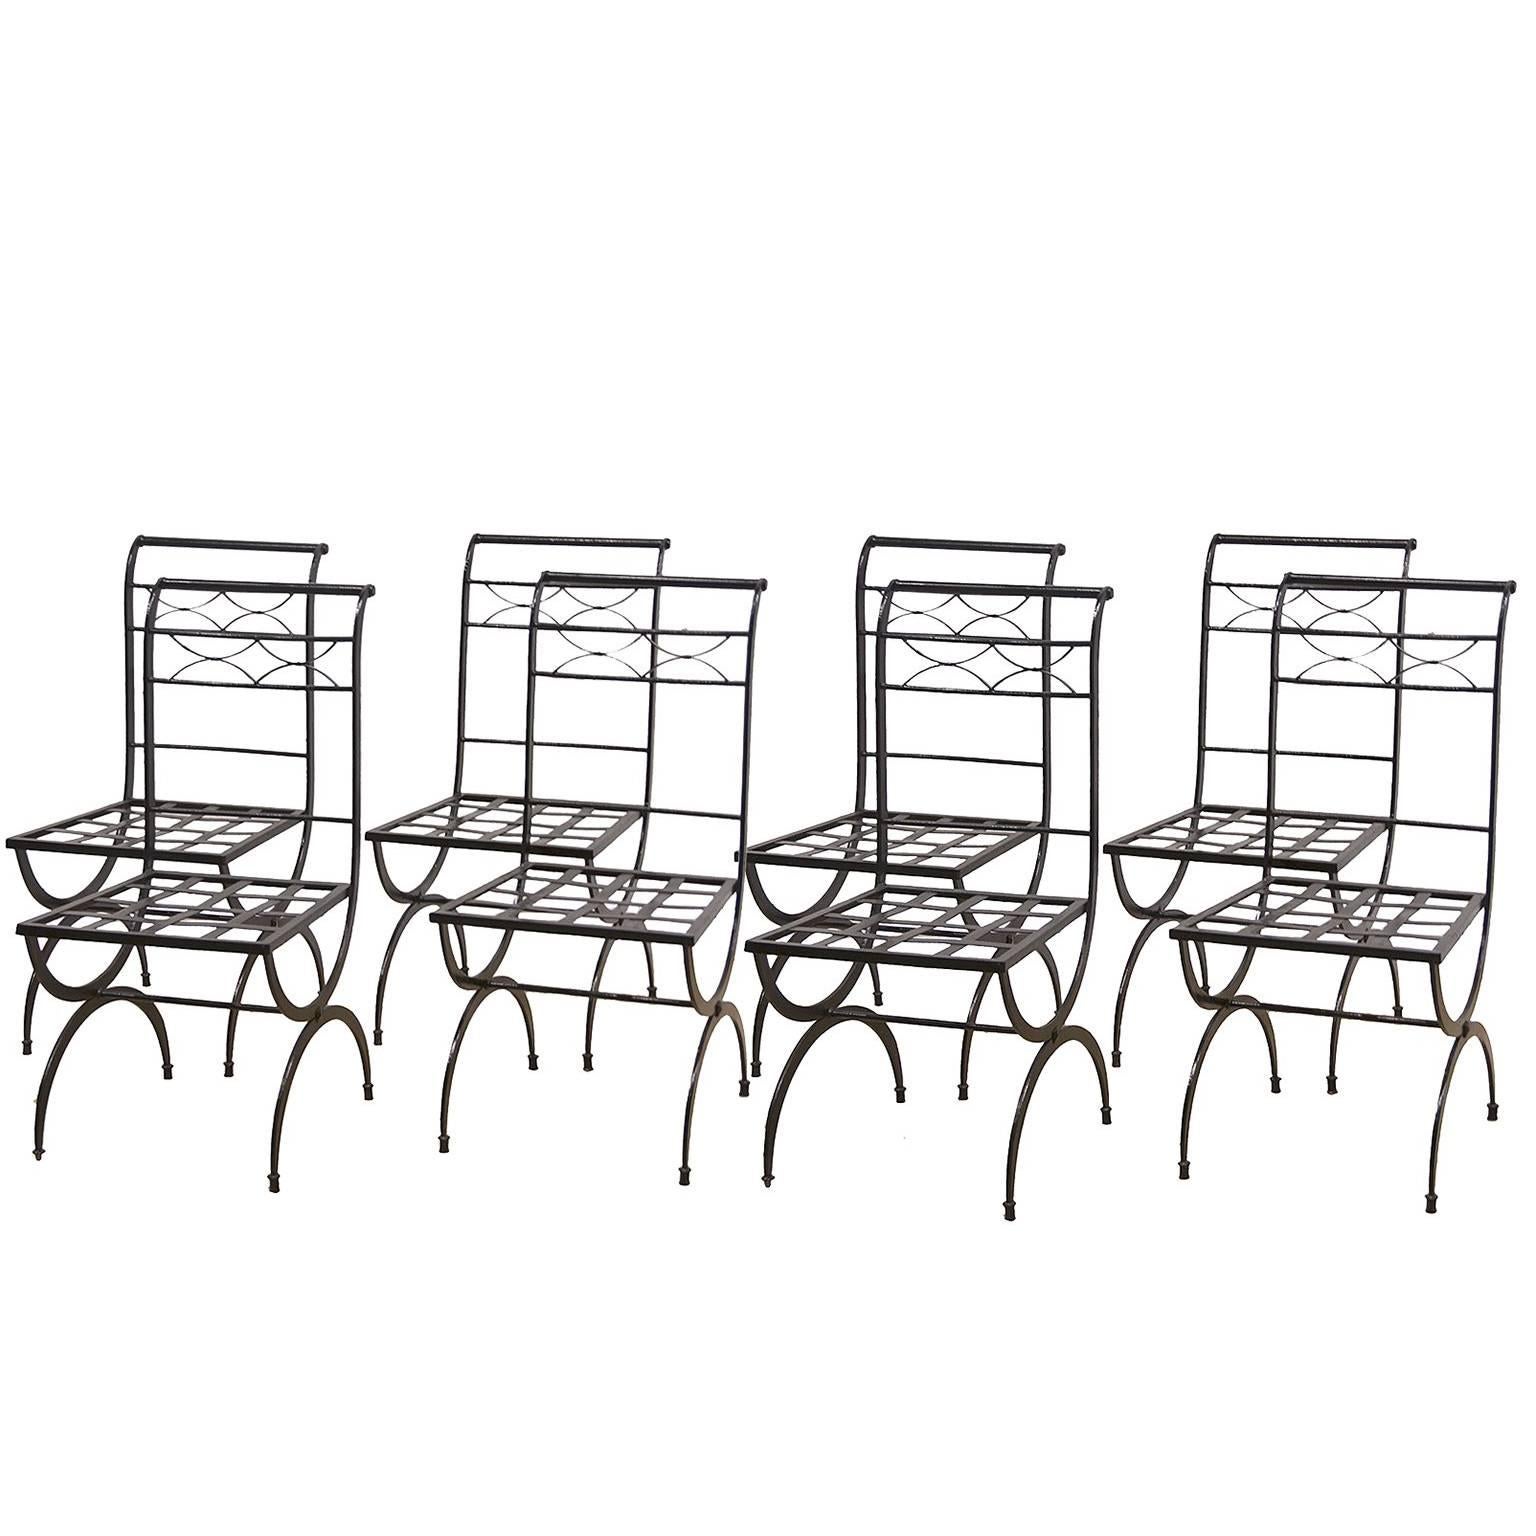 Set of Eight French Wrought Iron Chairs, Empire Style, Early 20th Century